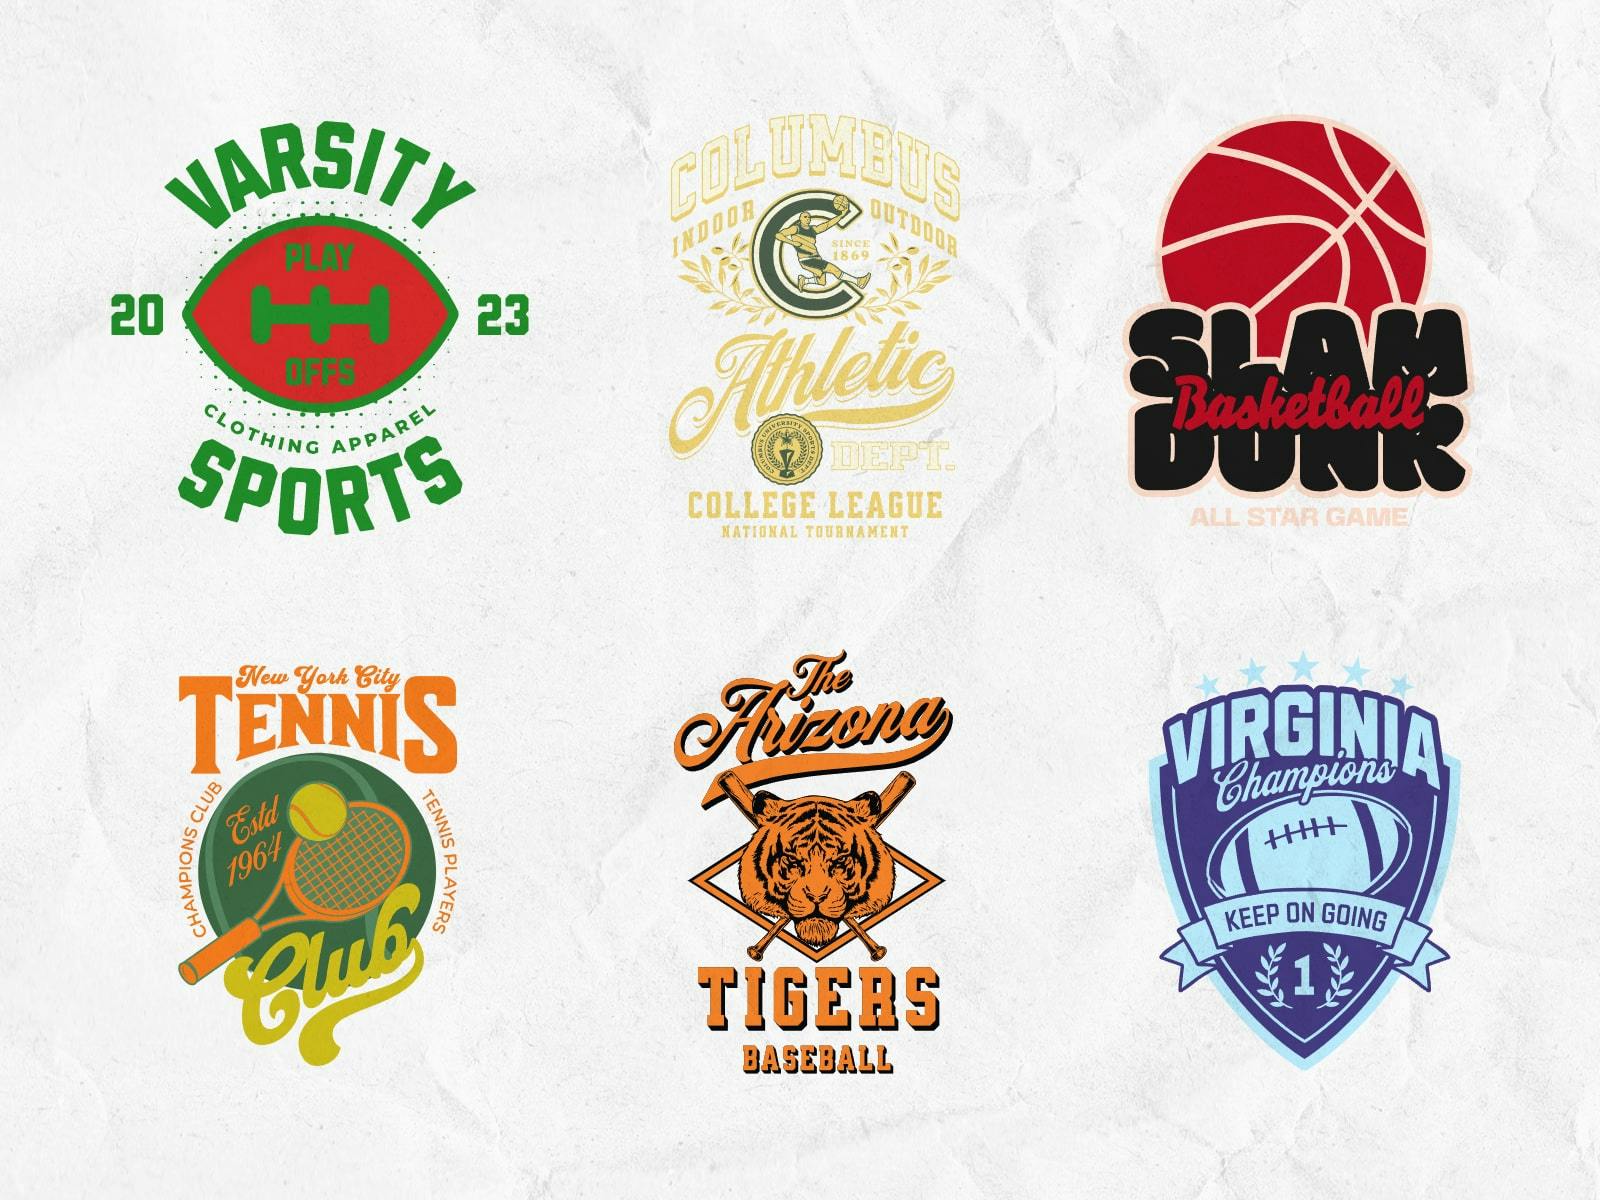 Sports T-Shirts: Collection of sport-themed t-shirt designs